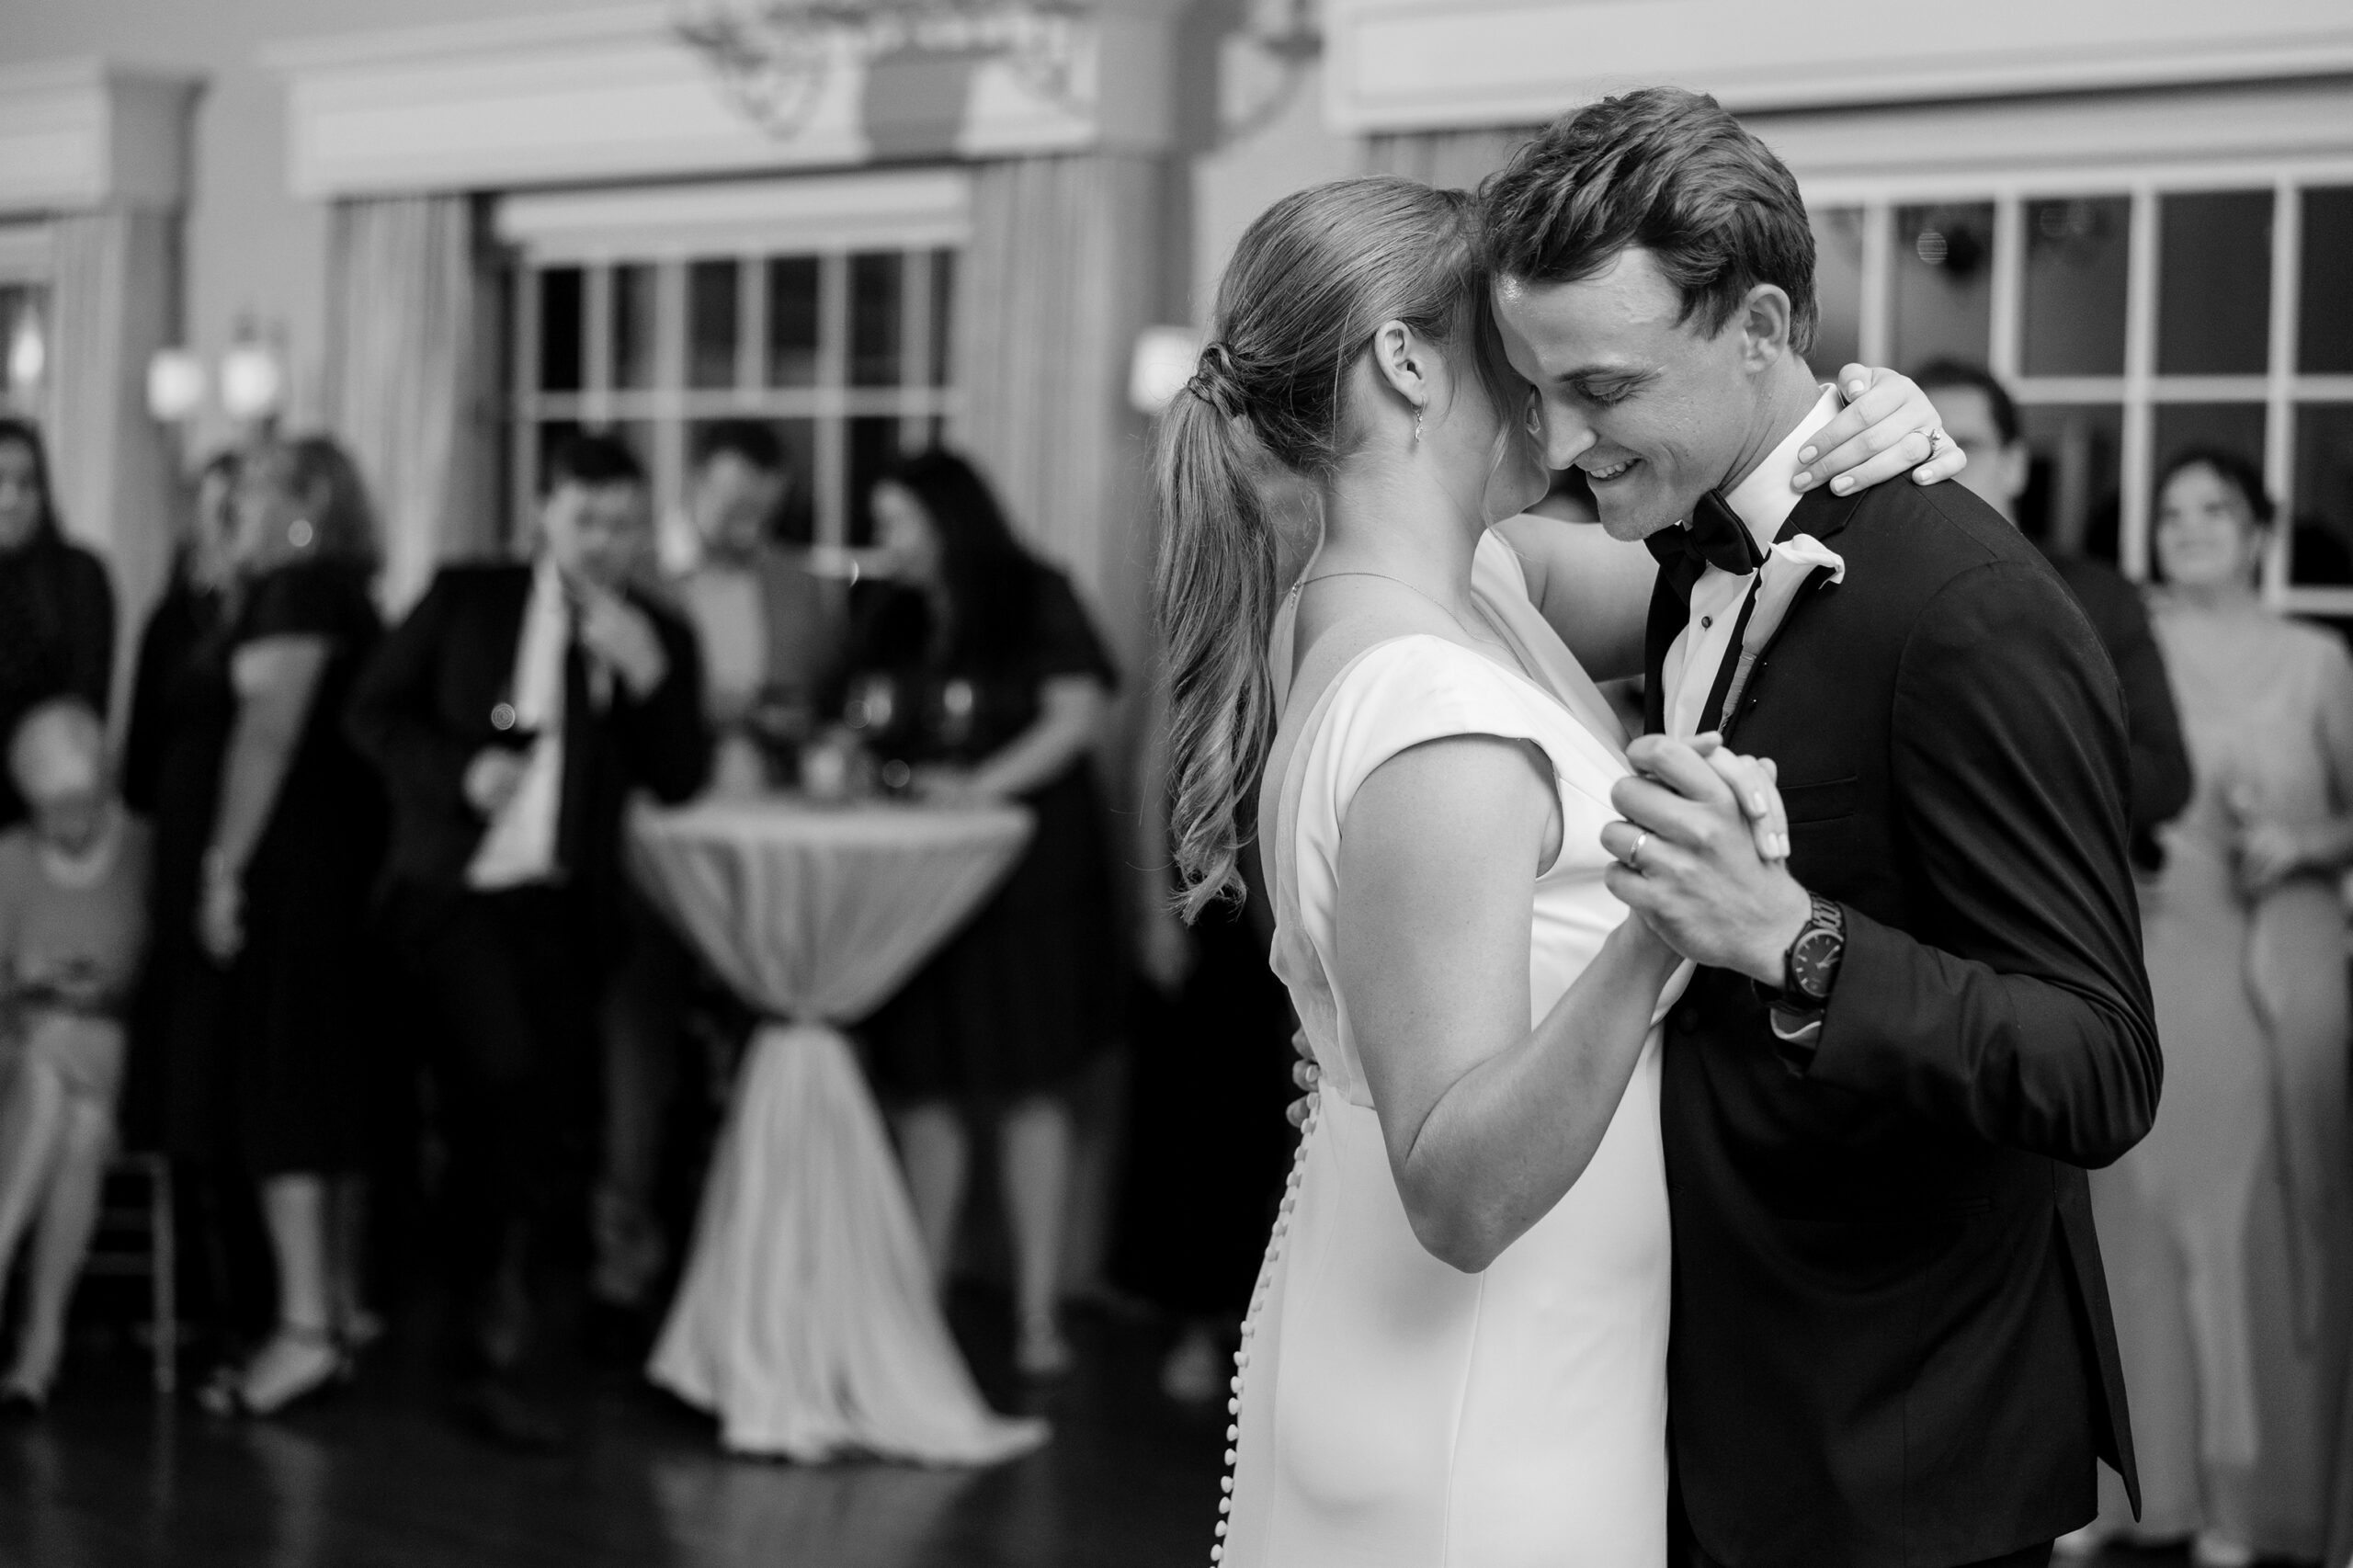 The bride and groom had their first dance at their Westmoreland Country Club wedding